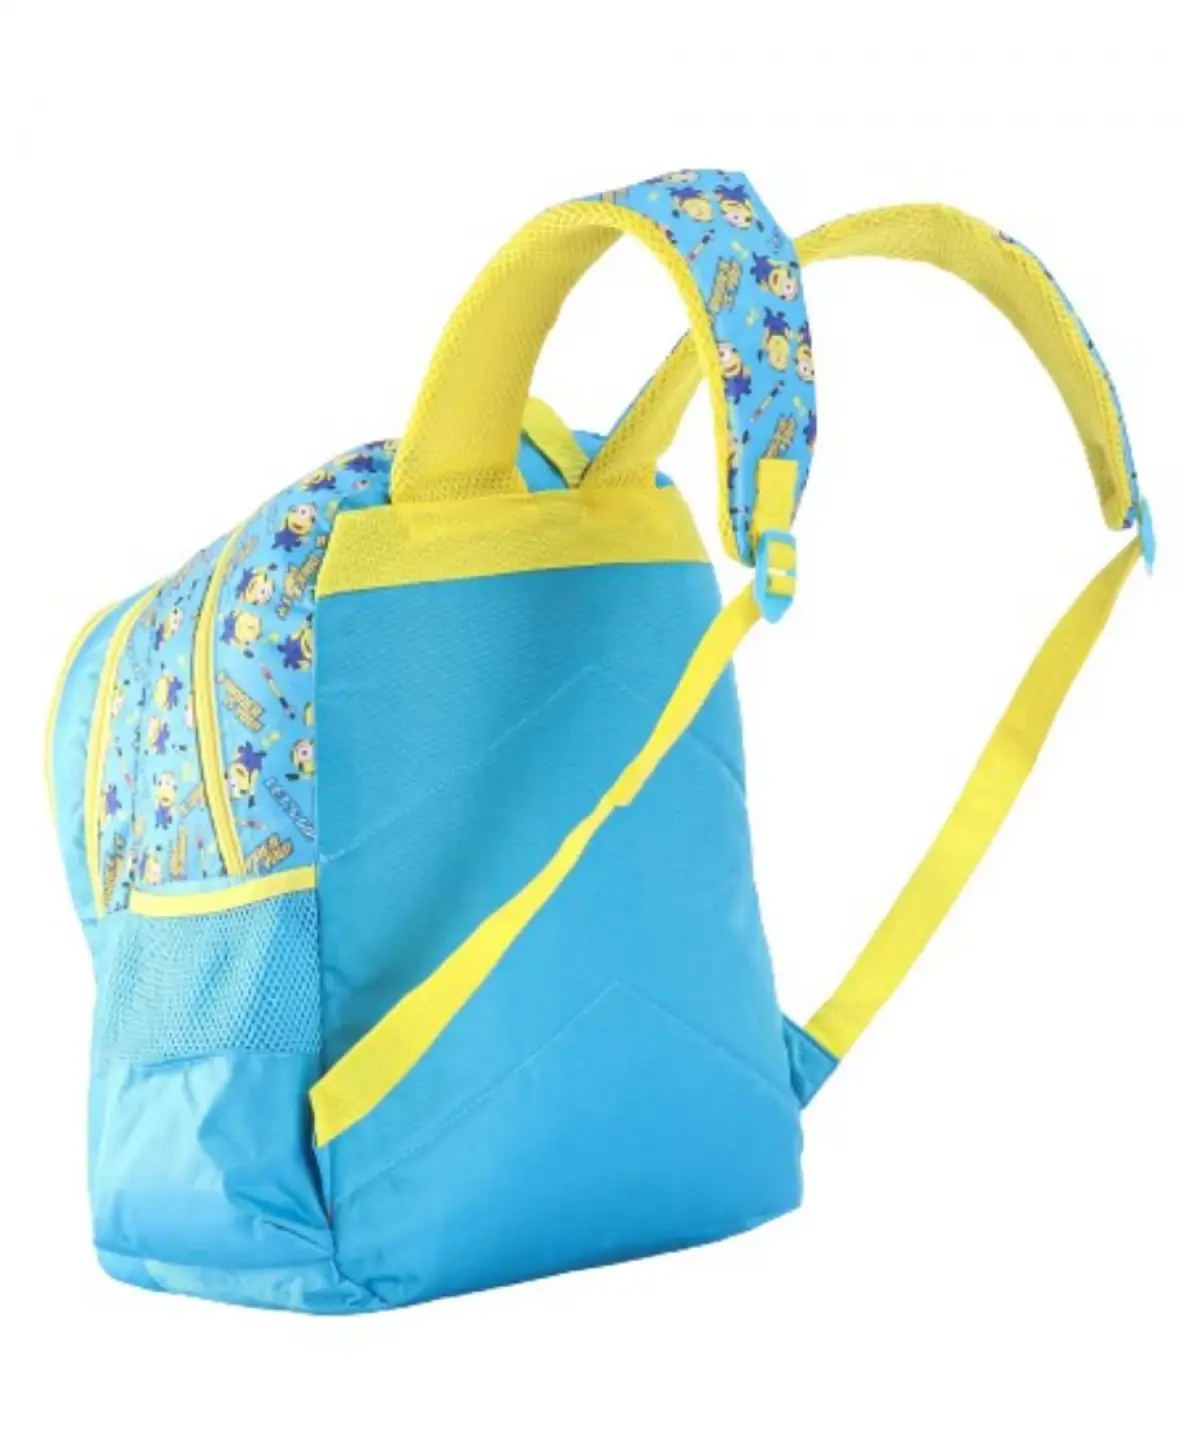 Striders 16 inches Minion Unleash Fun with Our Trendsetting School Bag Multicolour For Kids Ages 6Y+